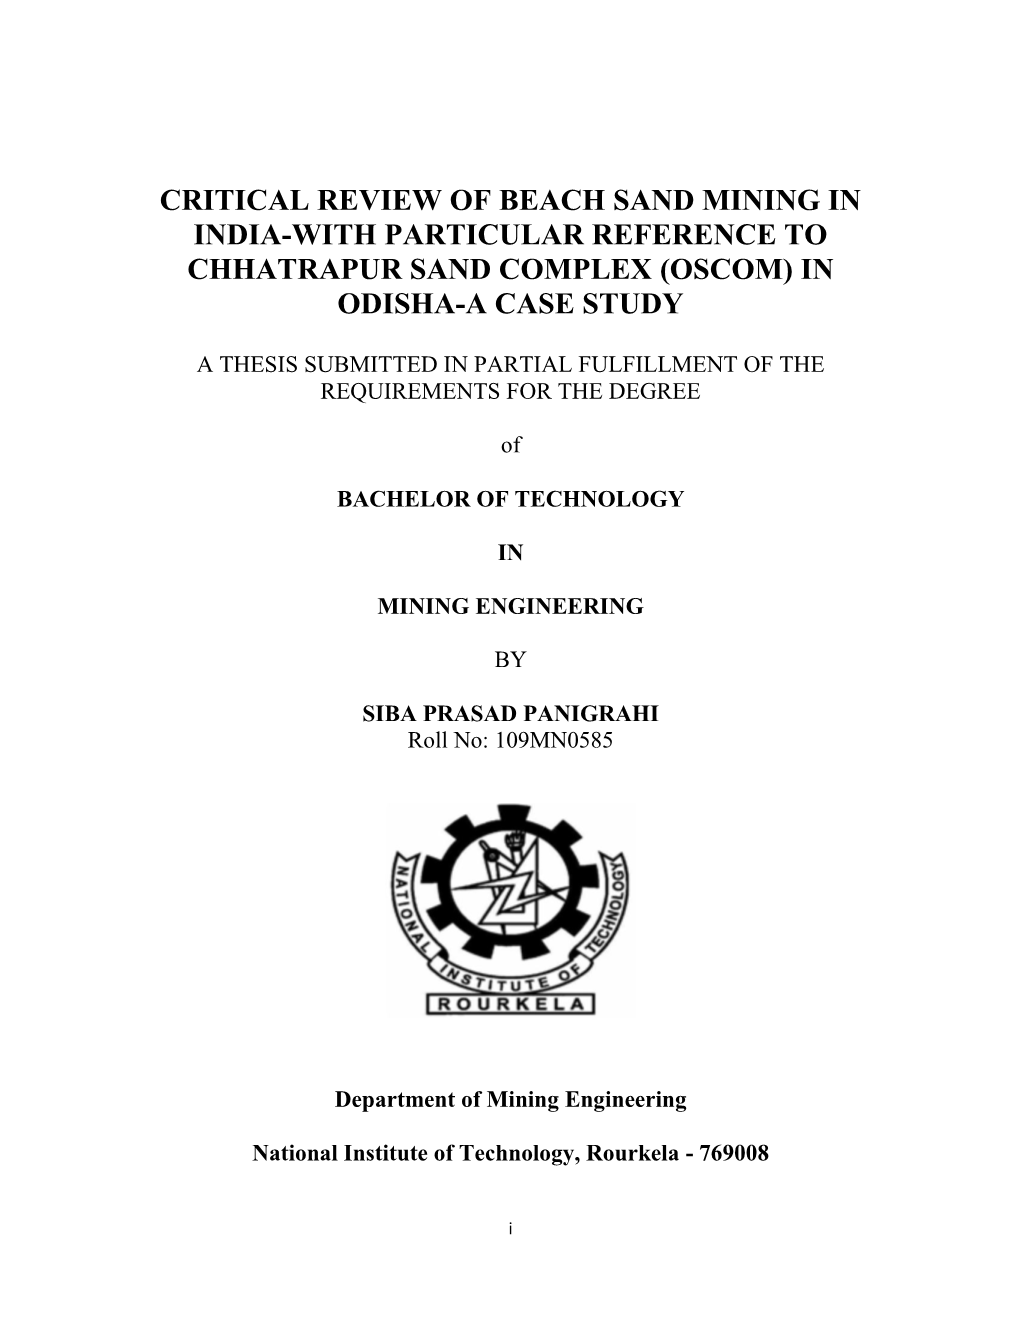 Critical Review of Beach Sand Mining in India-With Particular Reference to Chhatrapur Sand Complex (Oscom) in Odisha-A Case Study